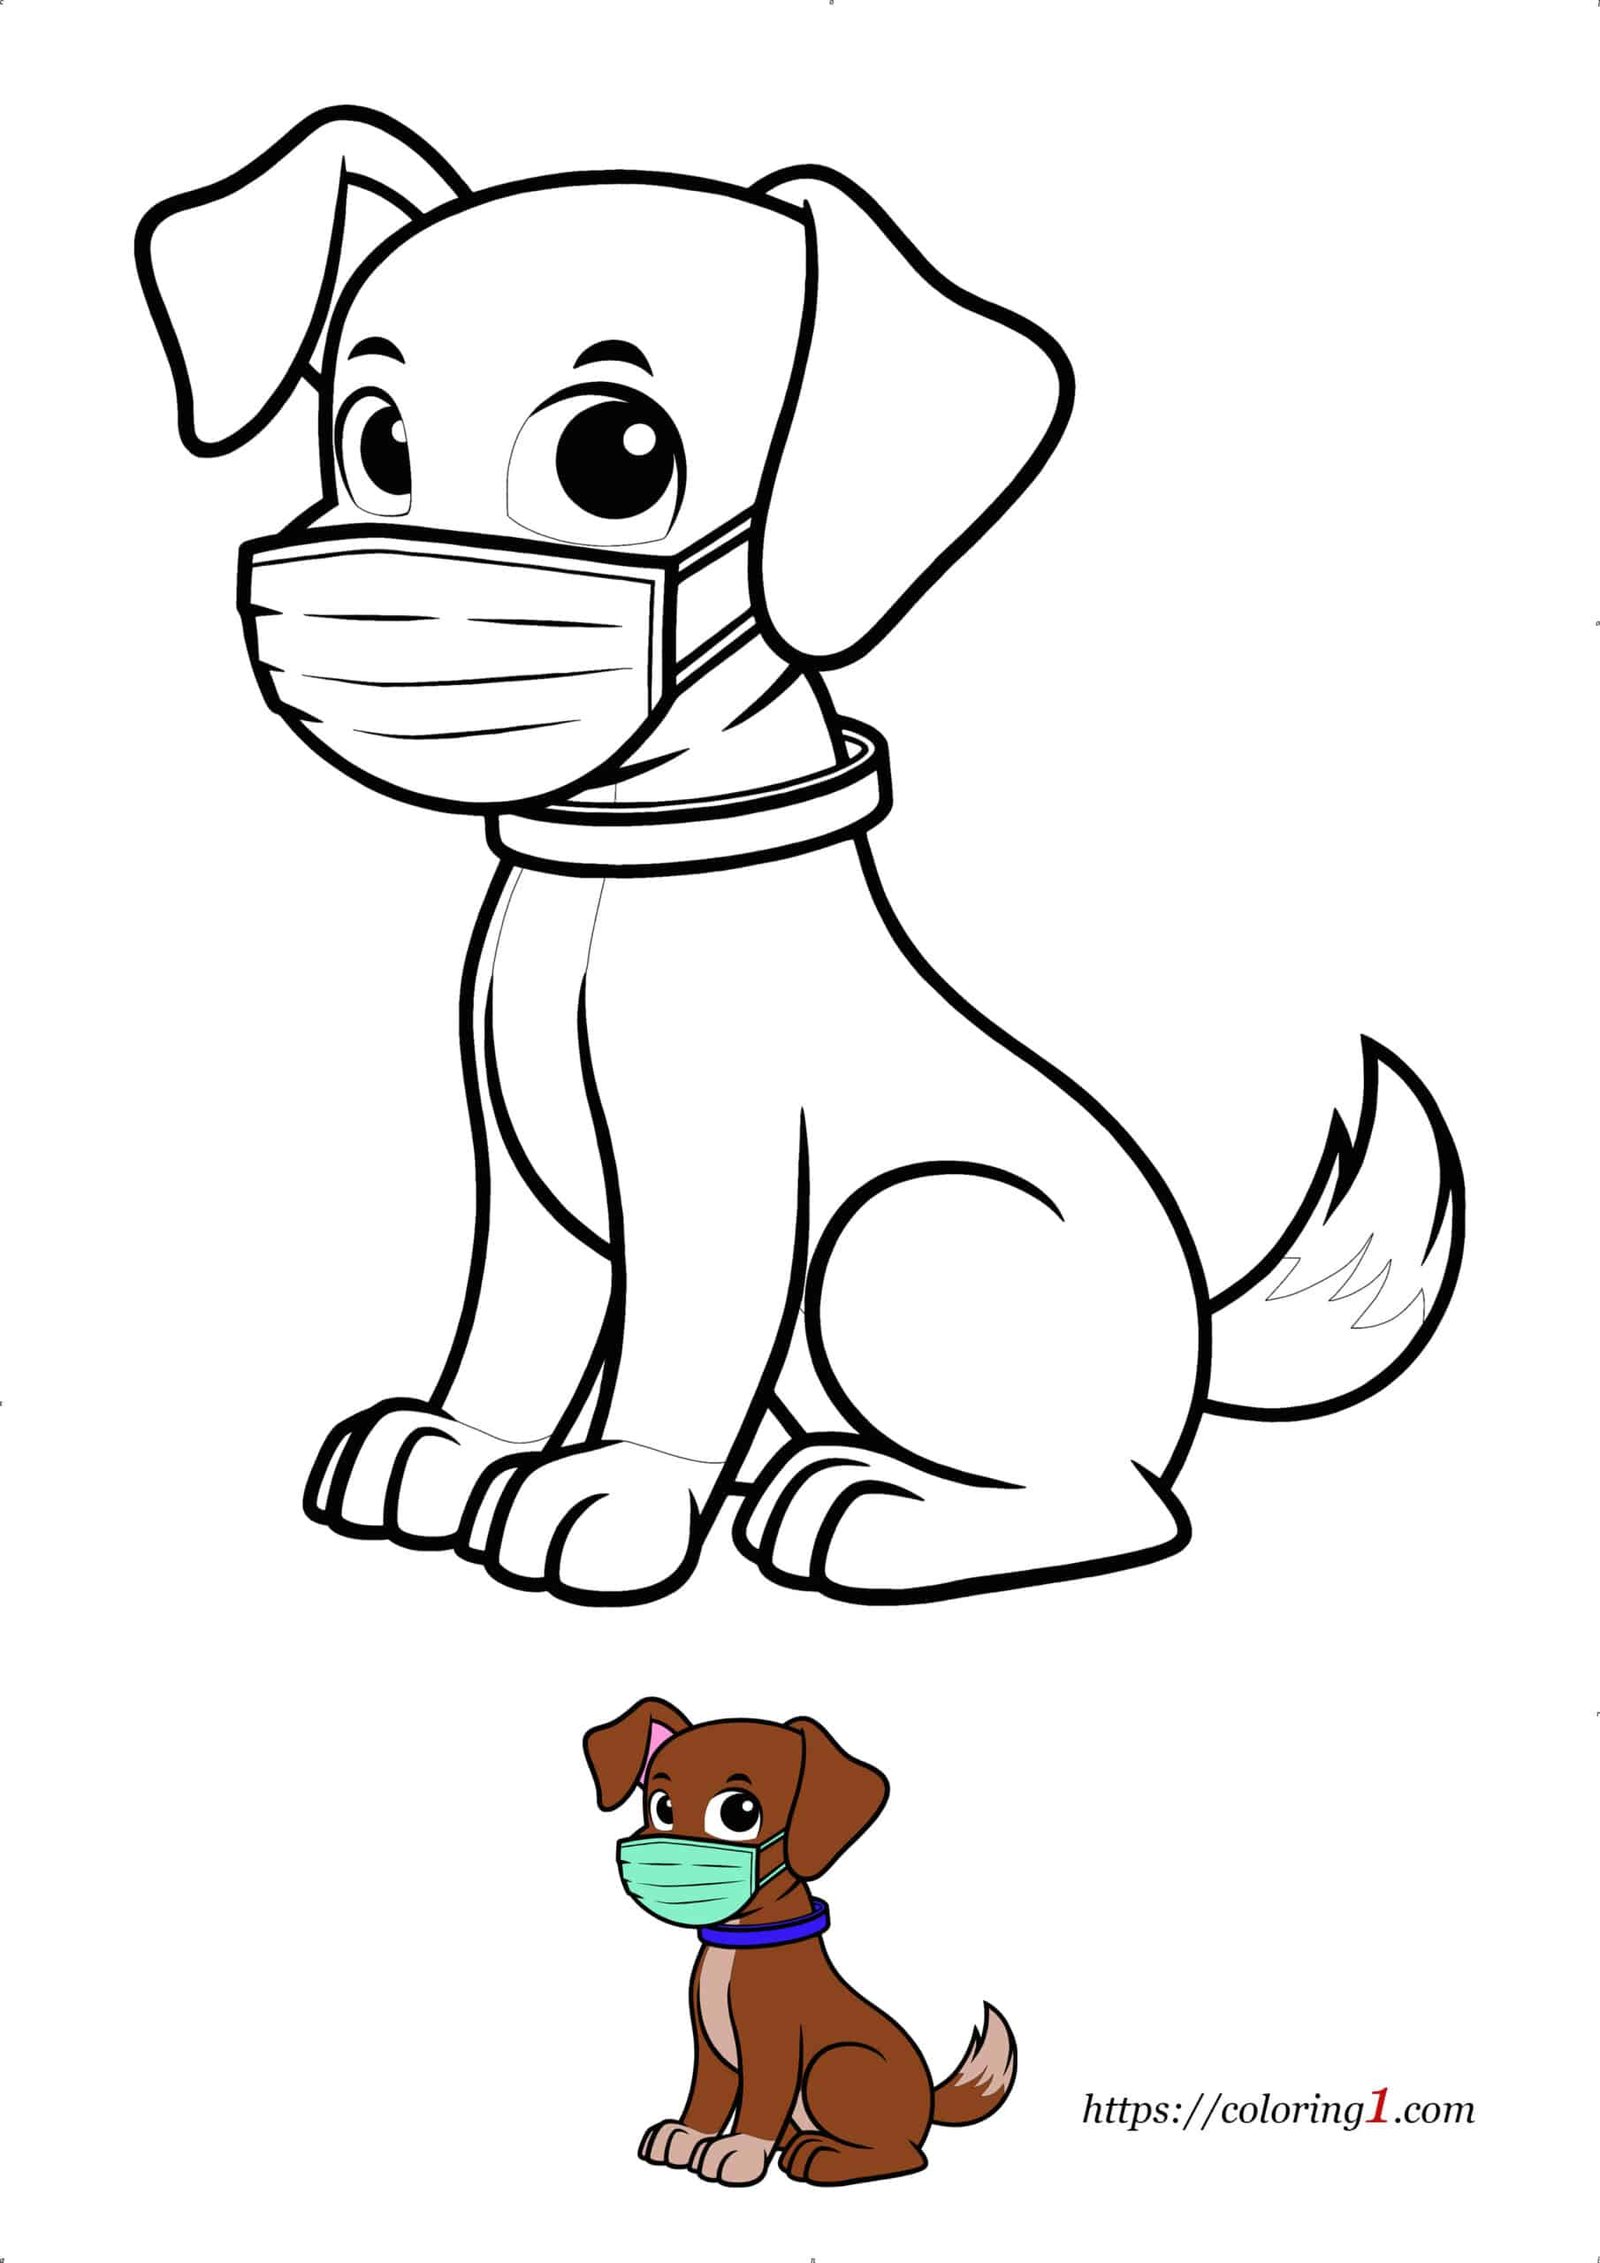 Dog Wearing Face Mask coloring page with preview how to color